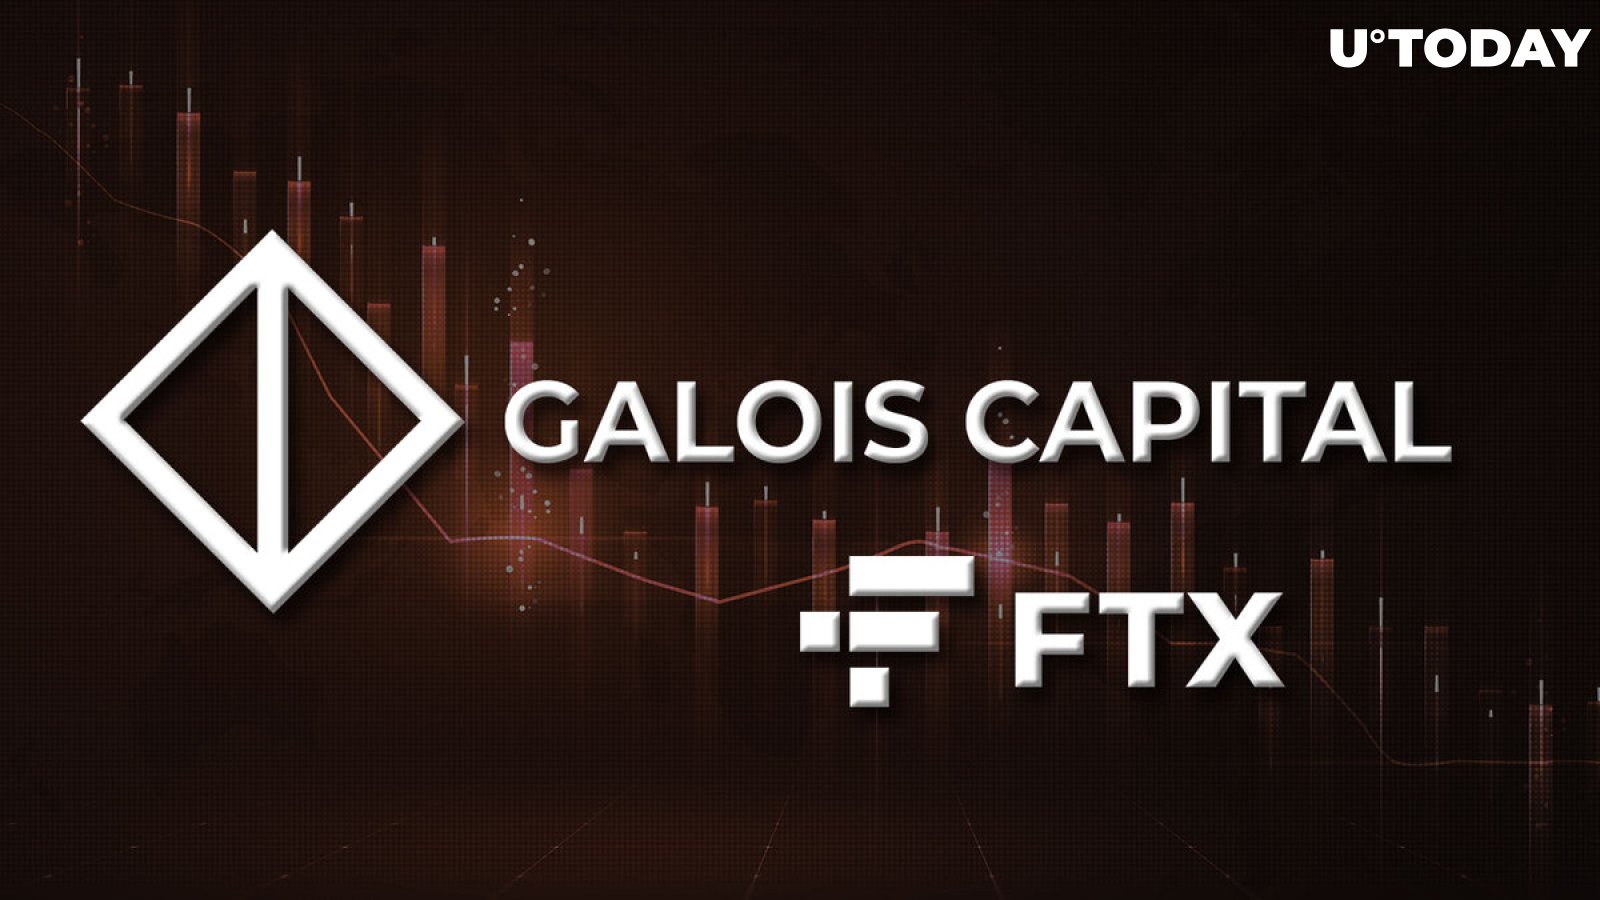 Galois Capital Lost 50% of Its Holdings in FTX; What Is Special About This Story?